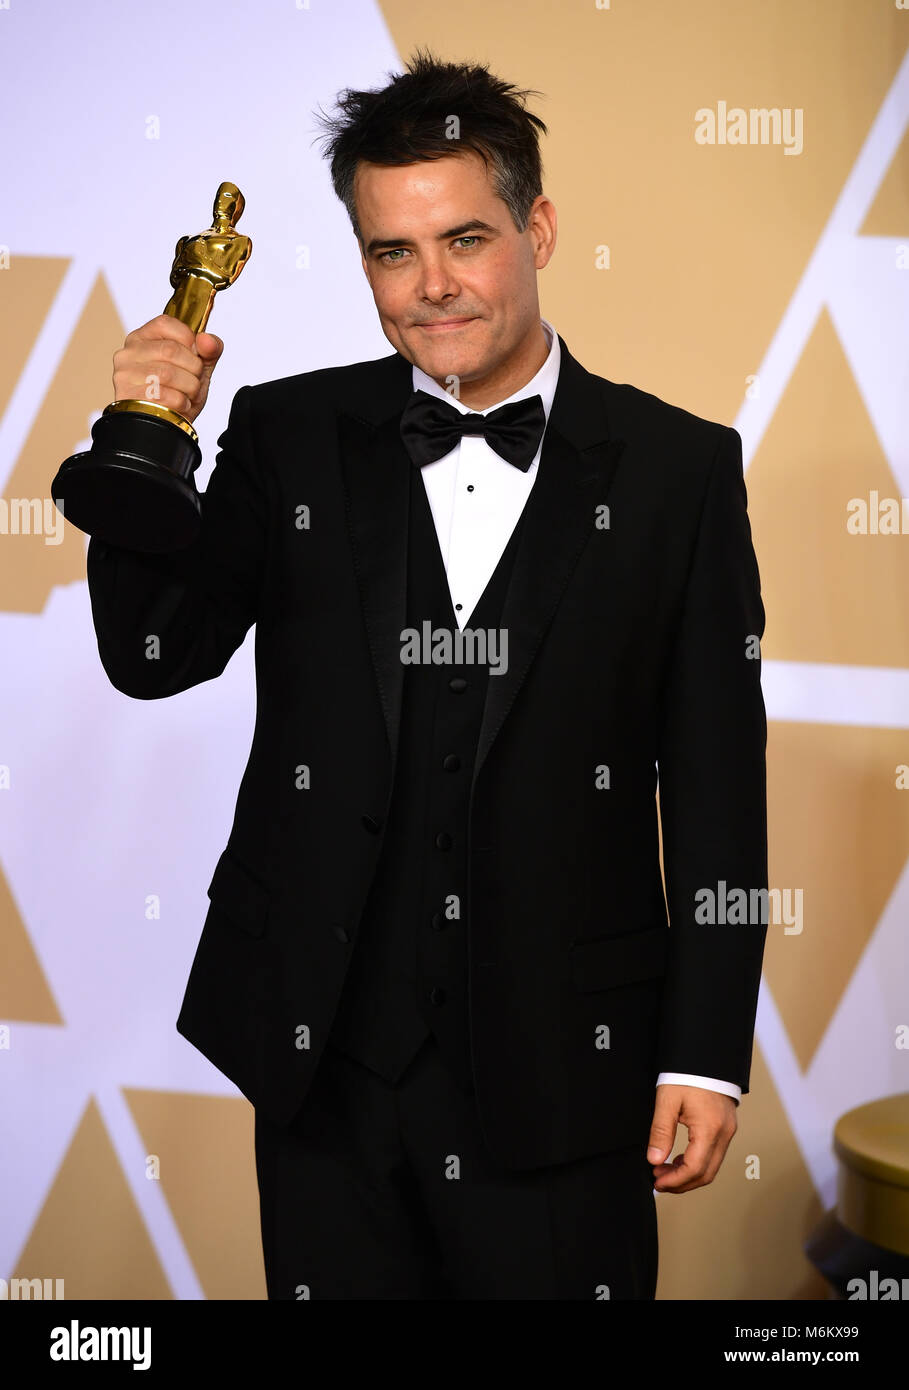 Sebastian Lelio with his Oscar for Best Foreign Language Film for A Fantastic Woman in the press room at the 90th Academy Awards held at the Dolby Theatre in Hollywood, Los Angeles, USA. PRESS ASSOCIATION Photo. Picture date: Sunday March 4, 2018. See PA Story SHOWBIZ Oscars. Photo credit should read: Ian West/PA Wire Stock Photo